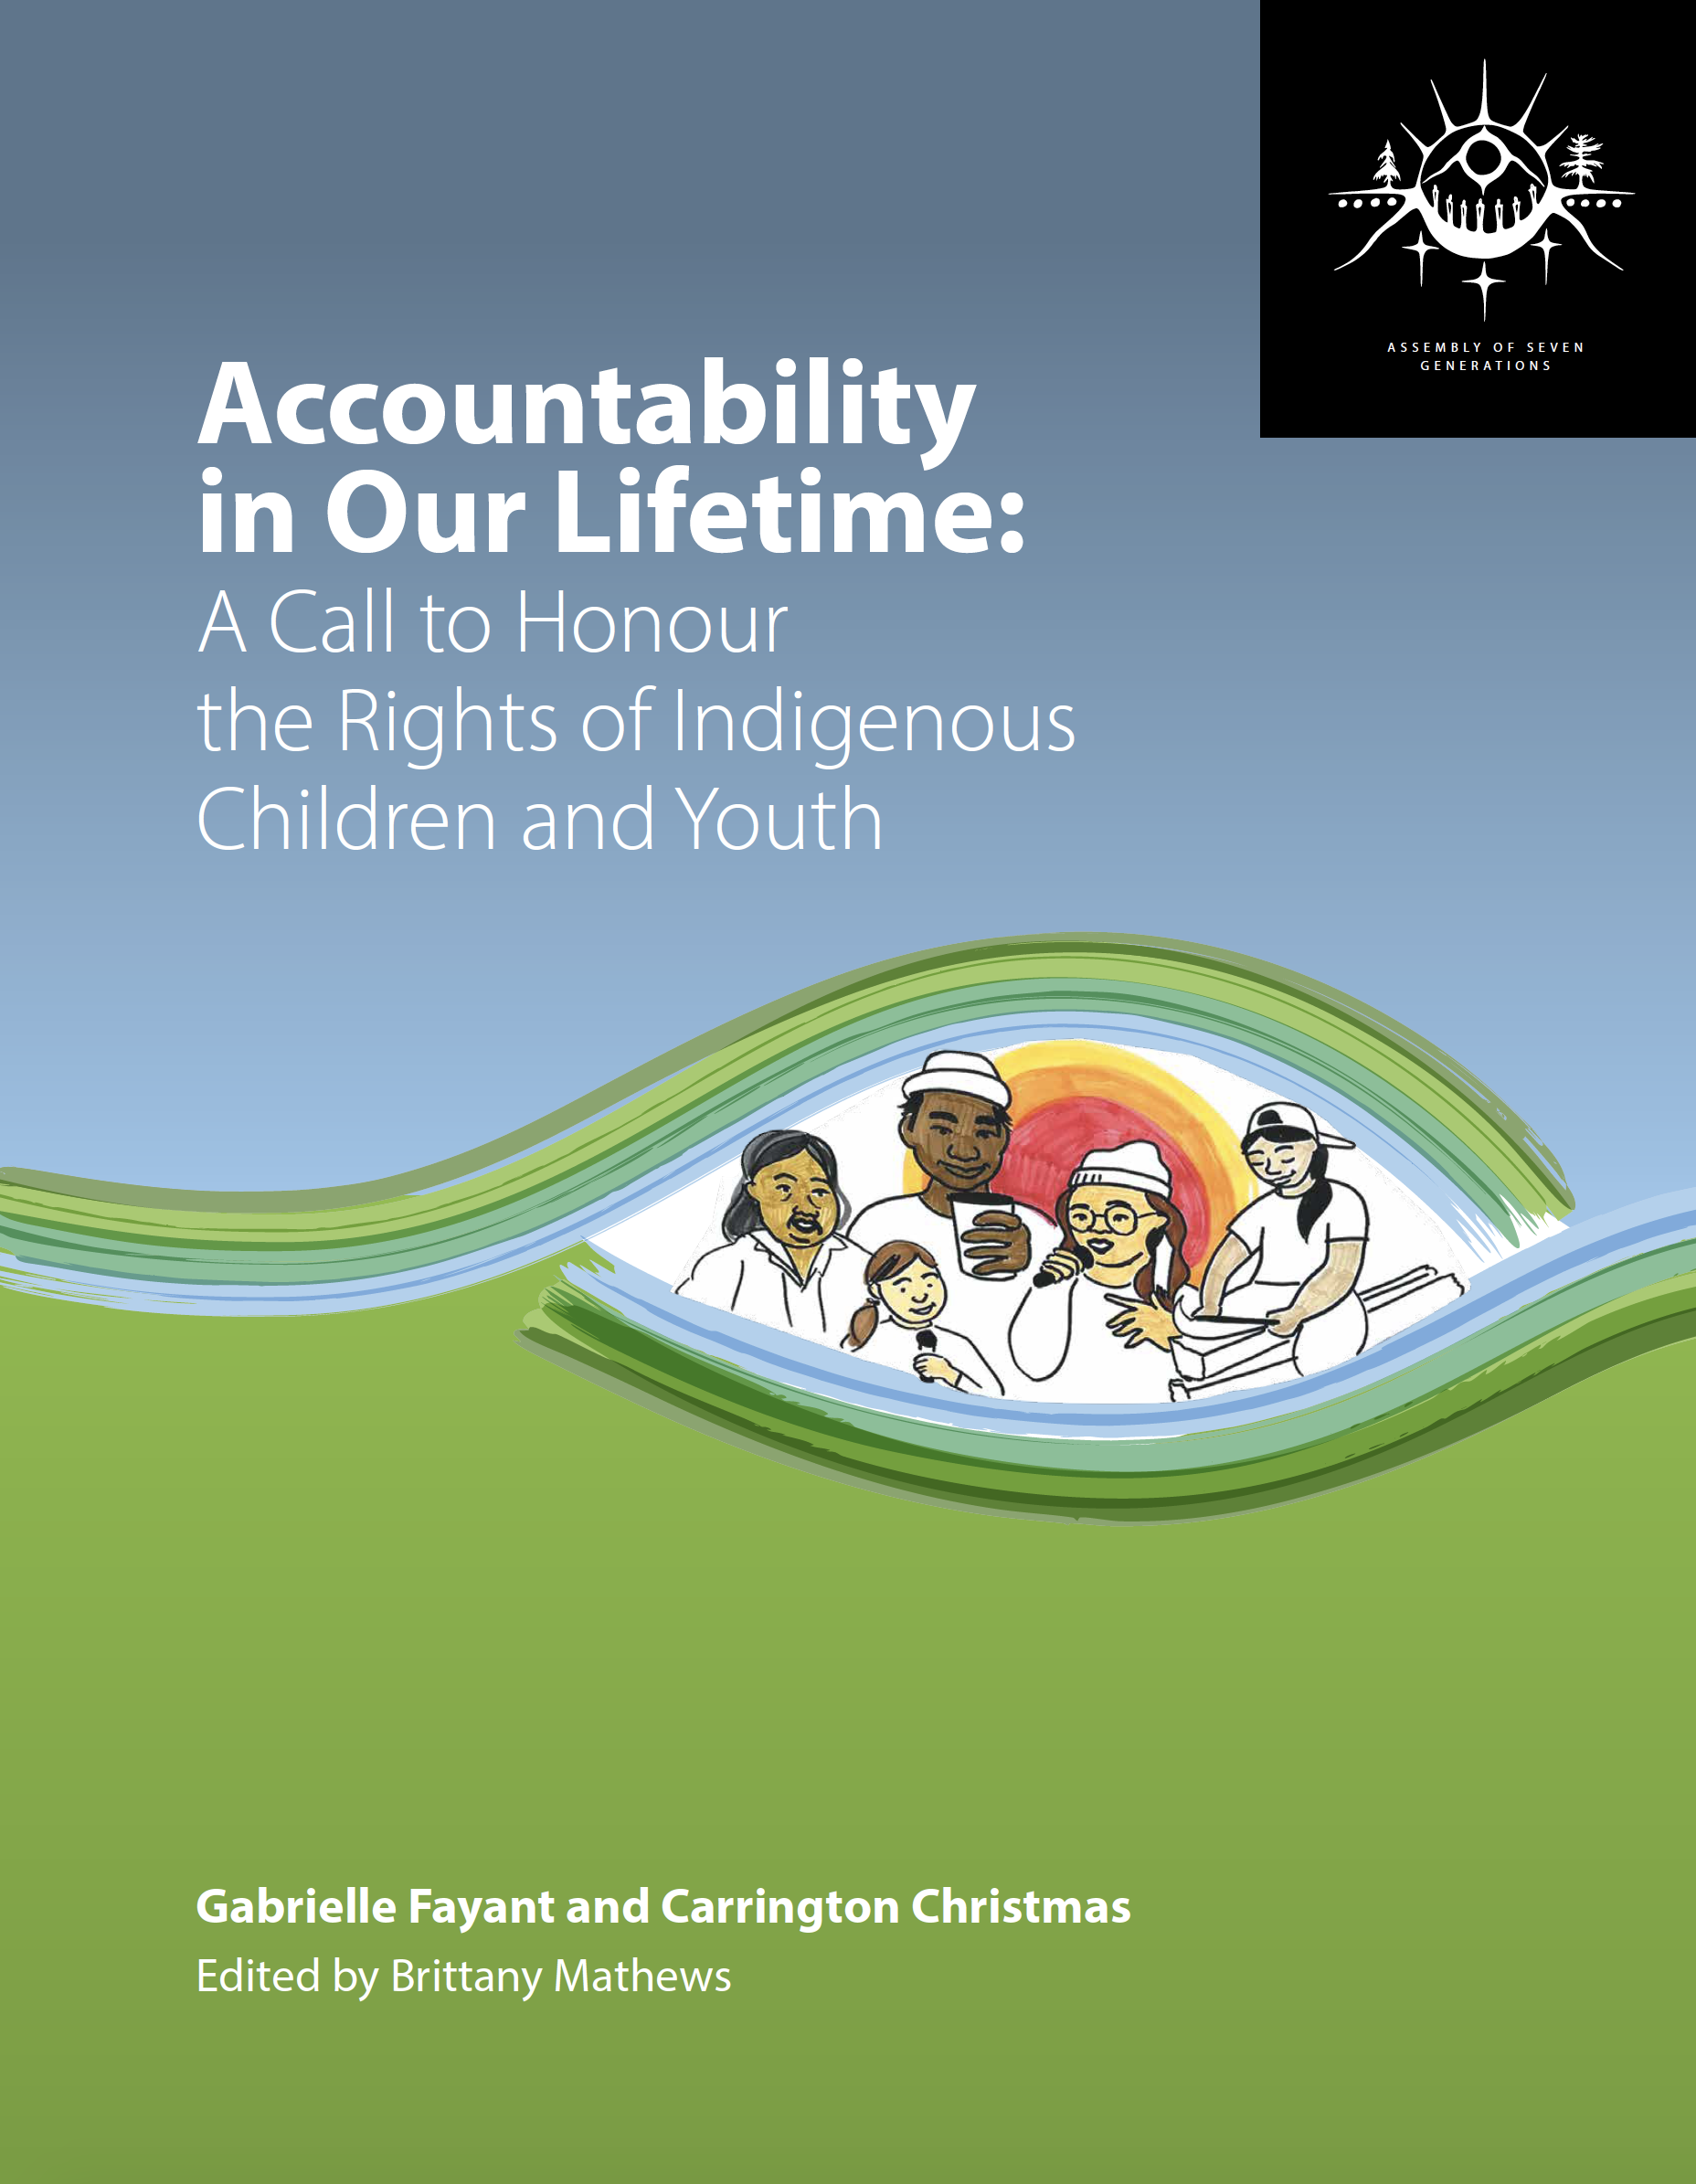 Accountability in Our Lifetime: A Call to Honour the Rights of Indigenous Children and Youth